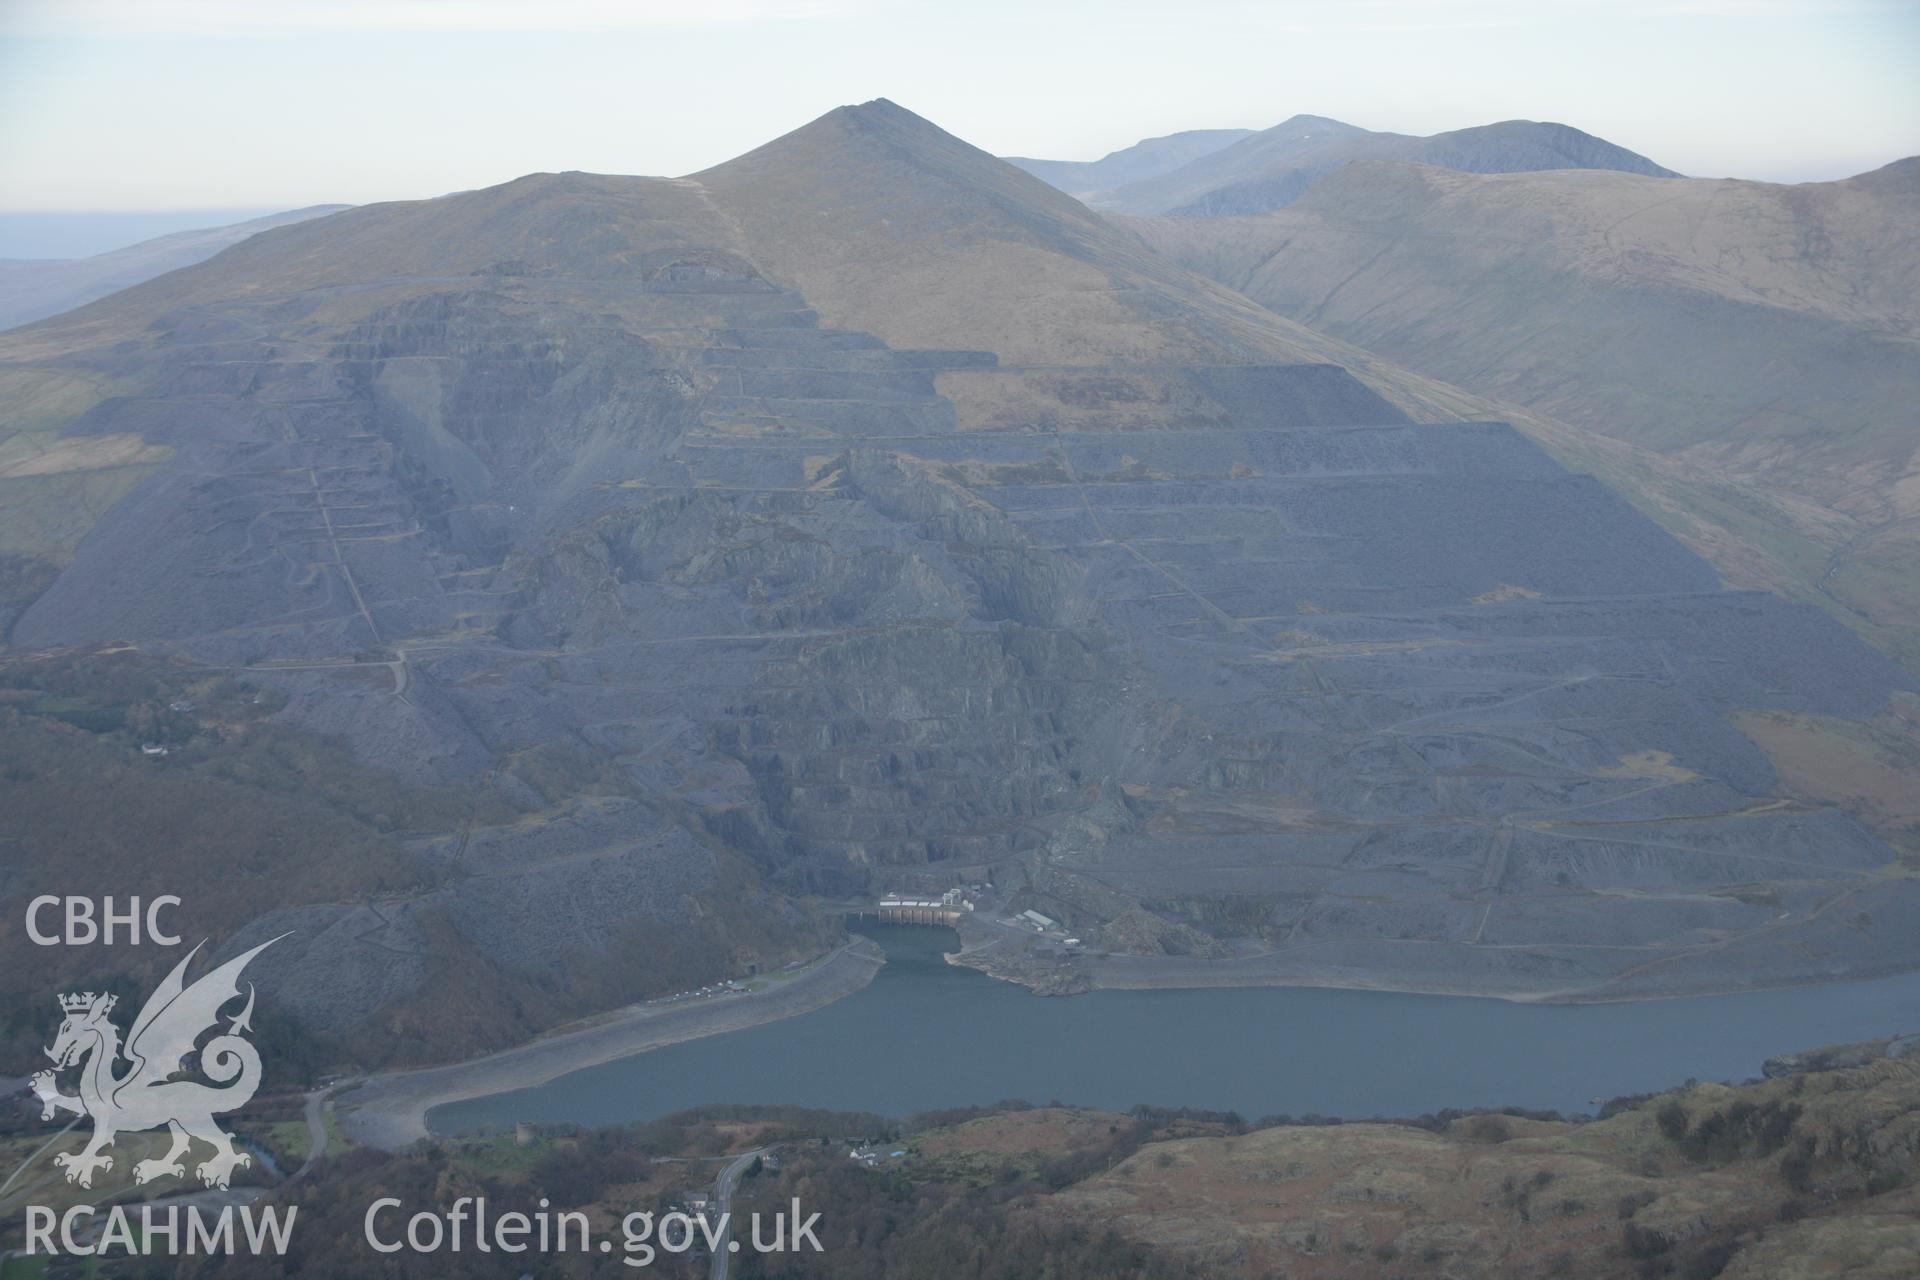 RCAHMW digital colour oblique photograph of Dinorwic Quarry from the south-west. Taken on 20/03/2005 by T.G. Driver.